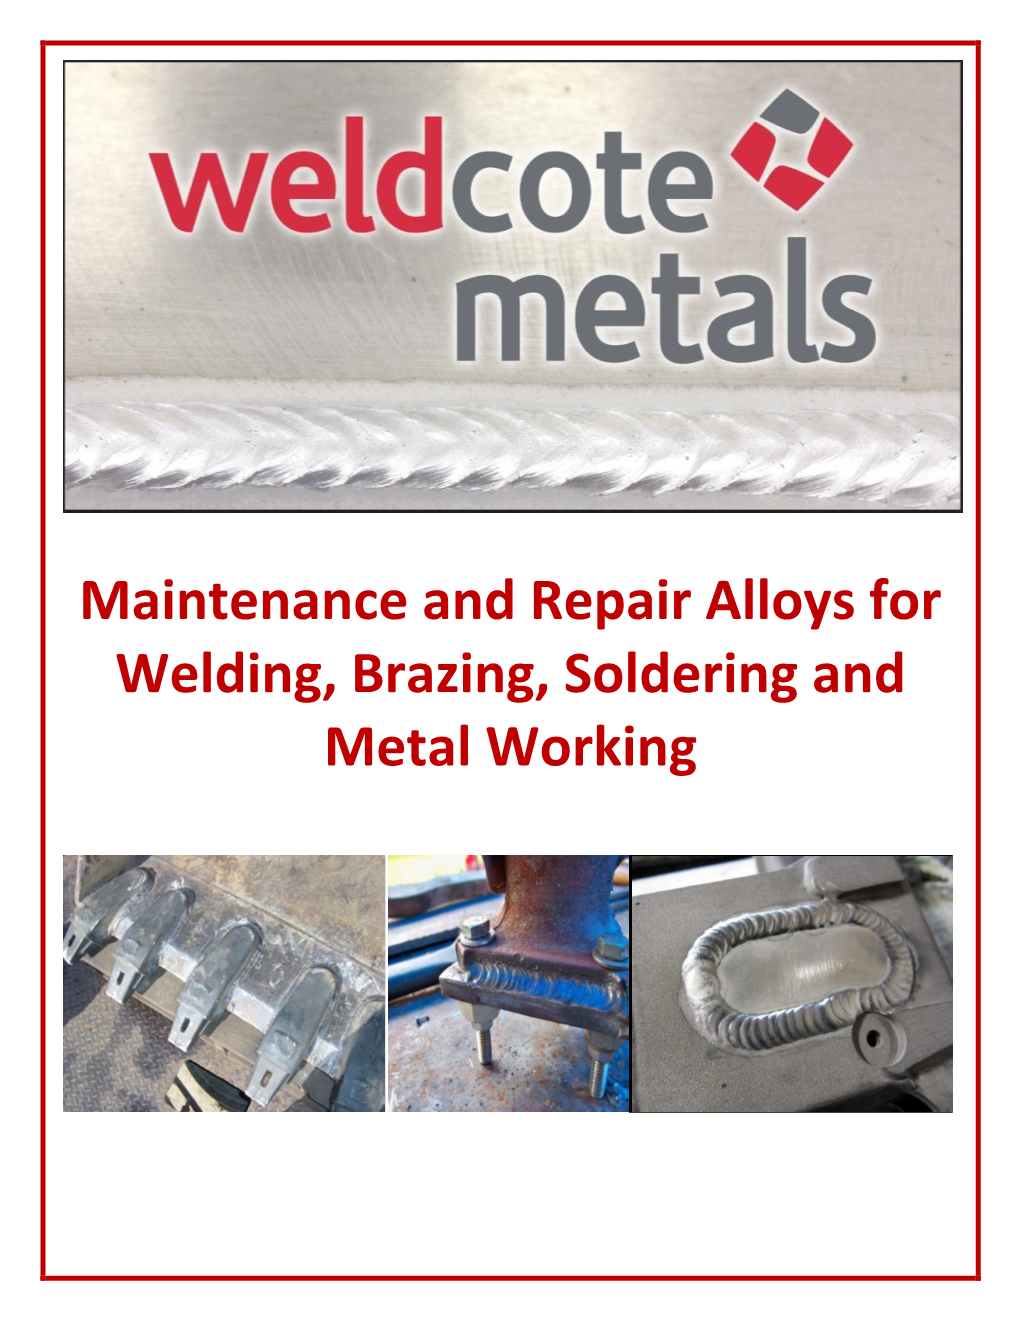 Maintenance and Repair Alloys for Welding, Brazing, Soldering and Metal Working